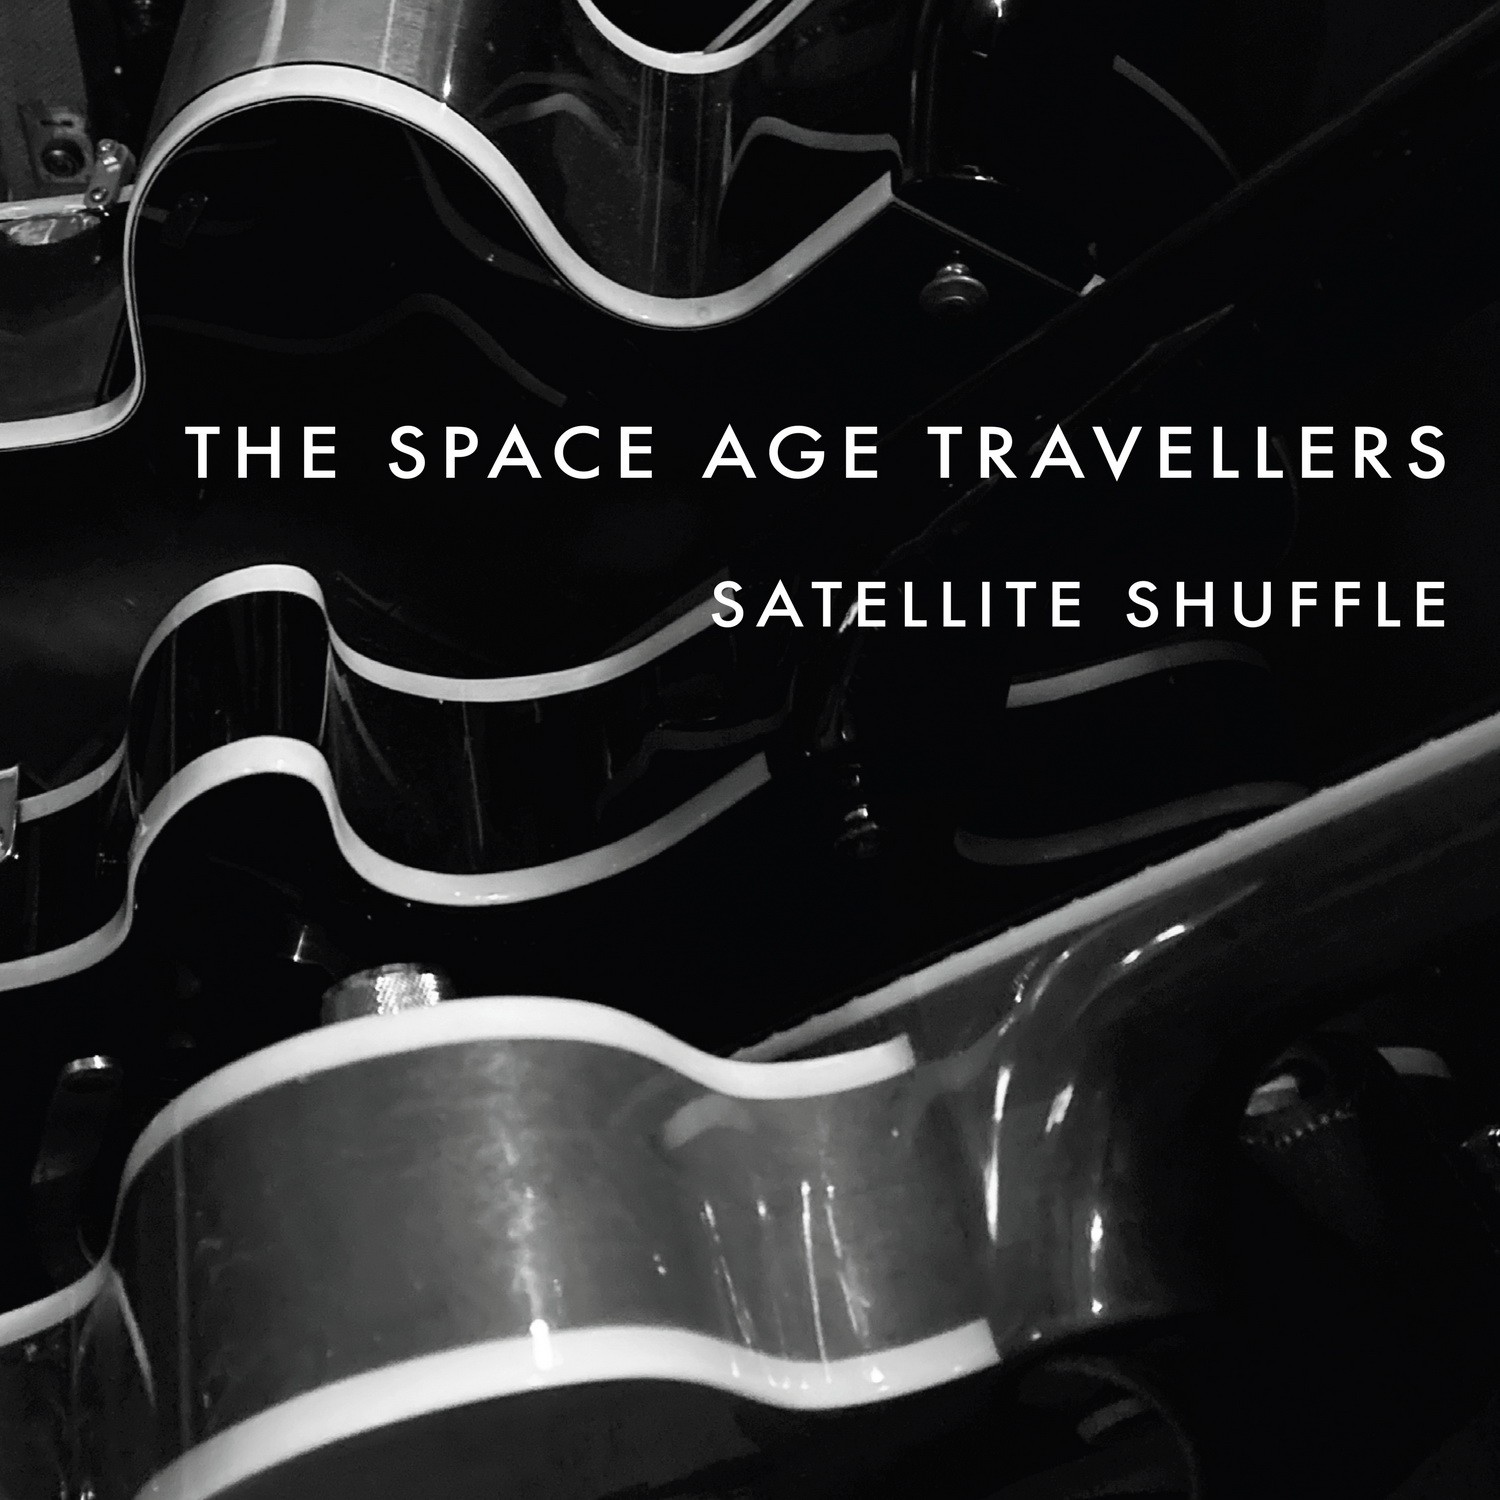 The Space Age Travellers - Satellite Shuffle